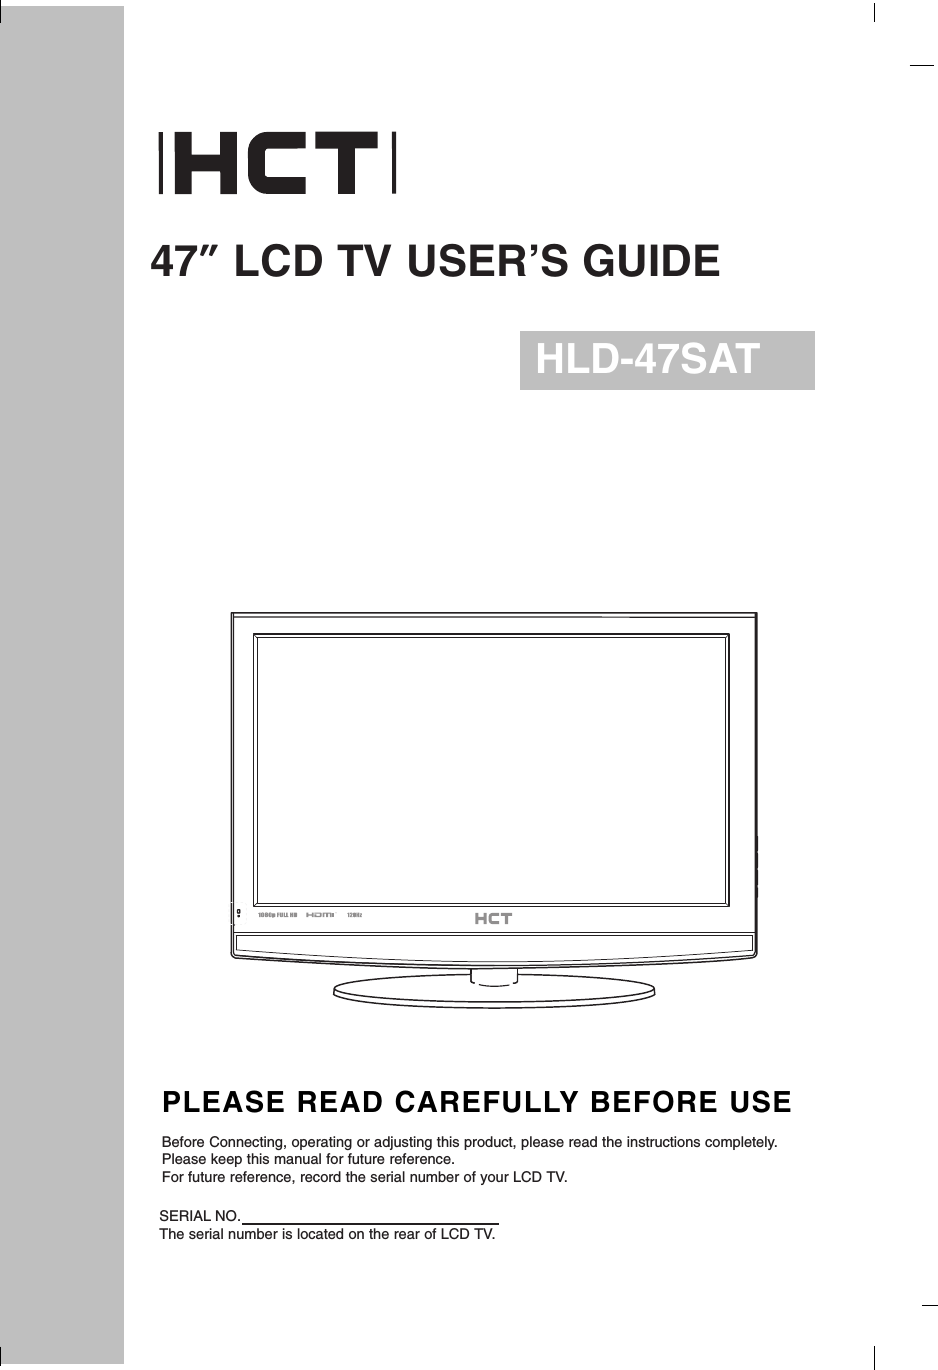 47”LCD TV USER’S GUIDEHLD-47SATPLEASE READ CAREFULLY BEFORE USEBefore Connecting, operating or adjusting this product, please read the instructions completely.Please keep this manual for future reference.For future reference, record the serial number of your LCD TV.SERIAL NO.The serial number is located on the rear of LCD TV.